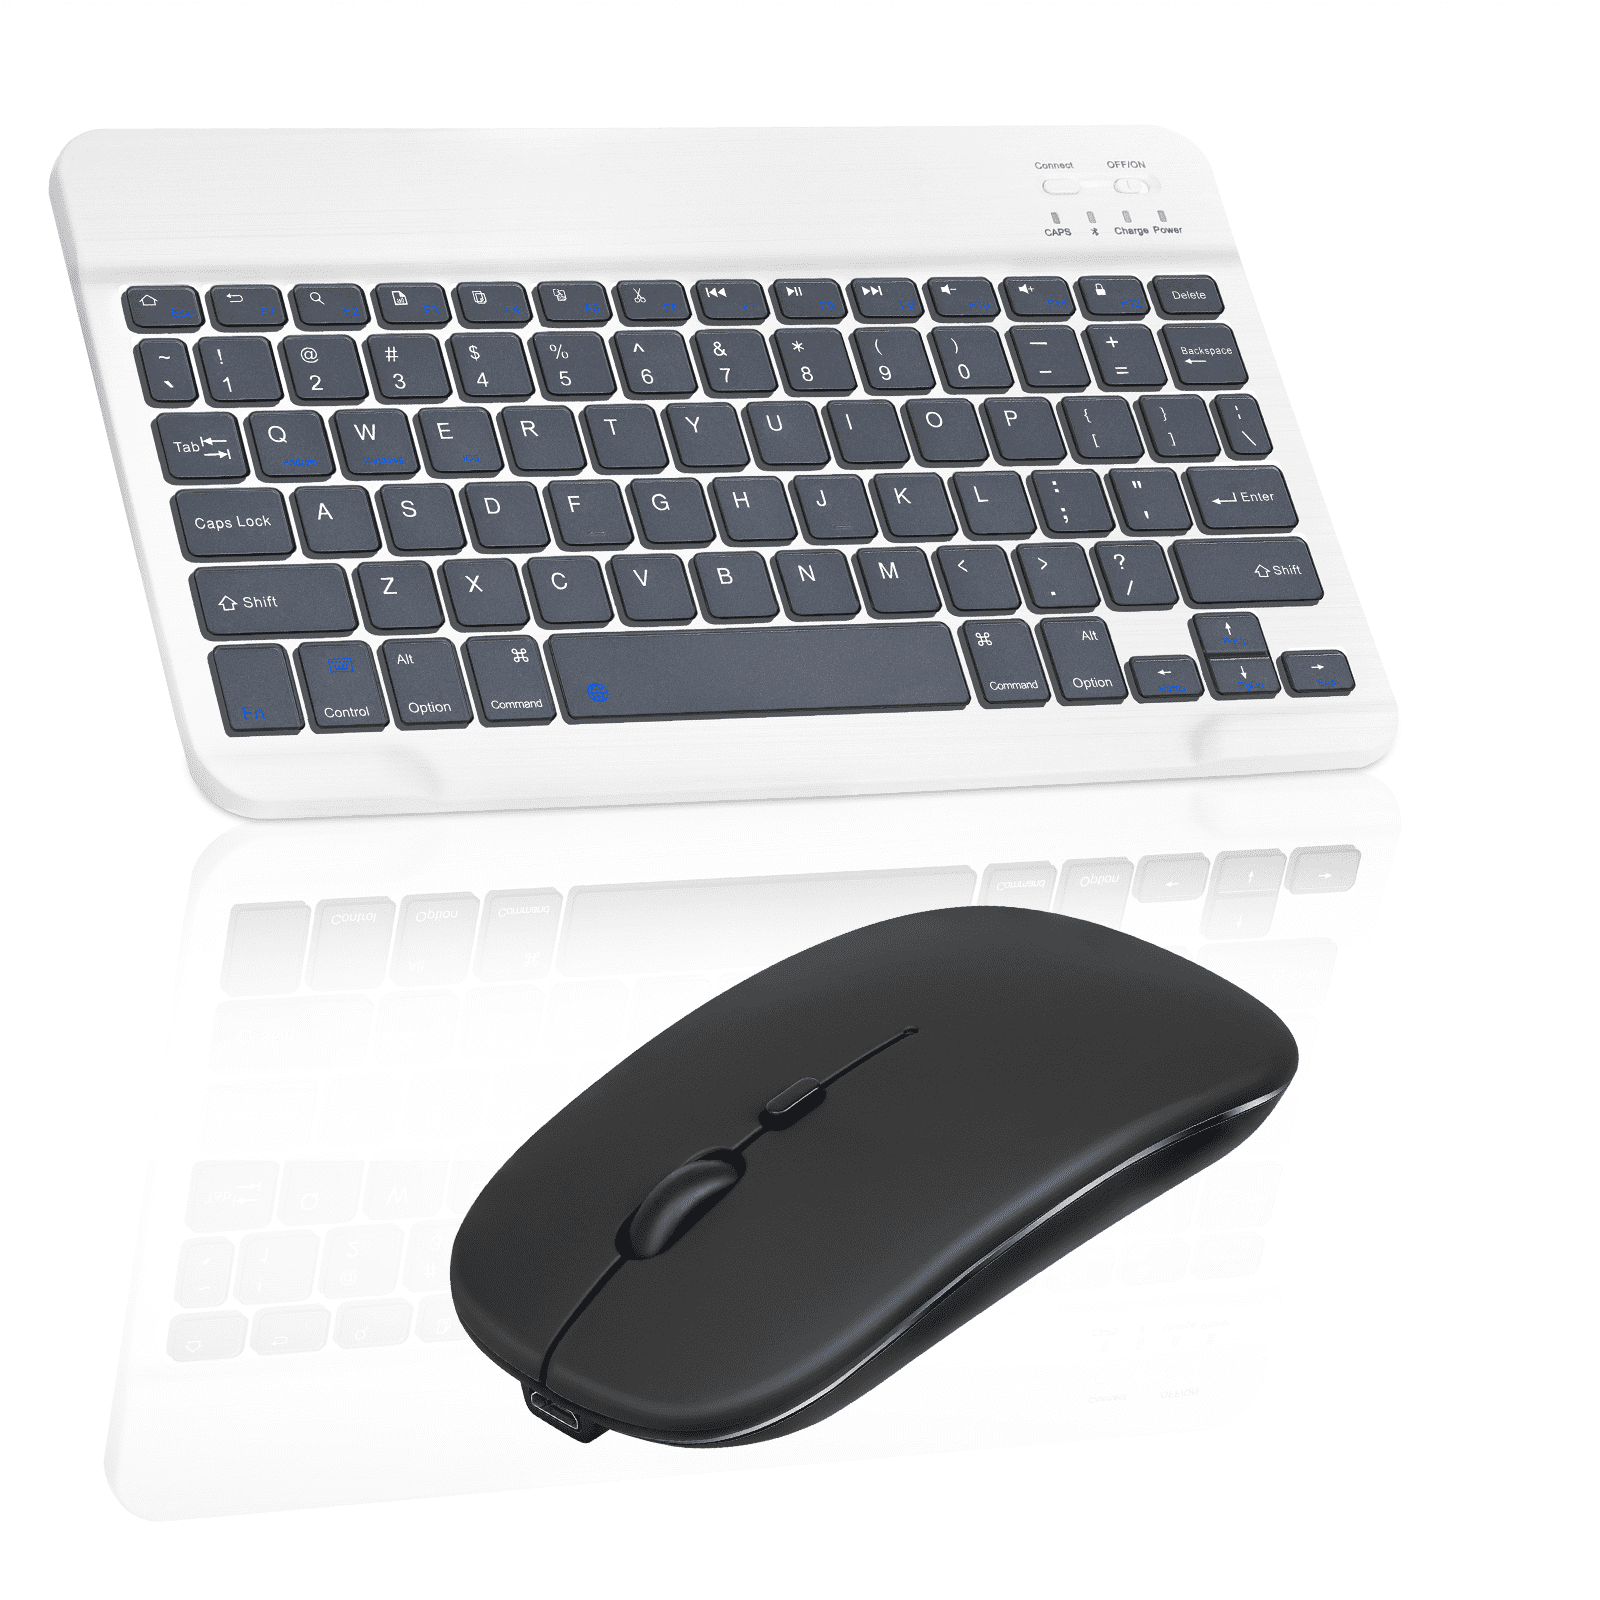 Laptop and Android TV Wireless Keyboard and Mouse Combo Seenda Wireless Ergonomic Keyboard 110 Keys Full-Size Keyboard Compatible with Windows PC 